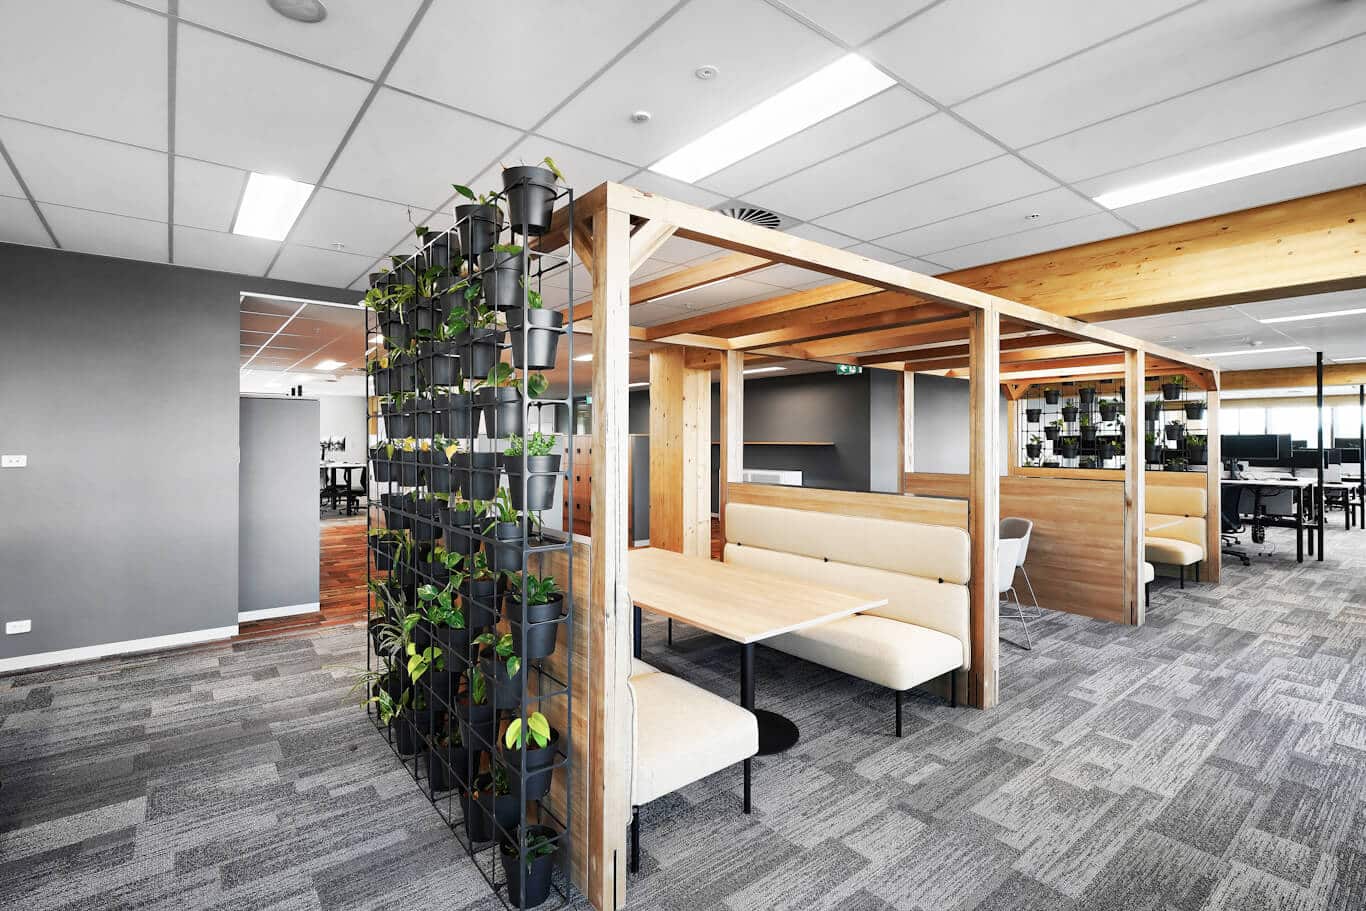 5 Reasons to Consider Renovating an Office Space